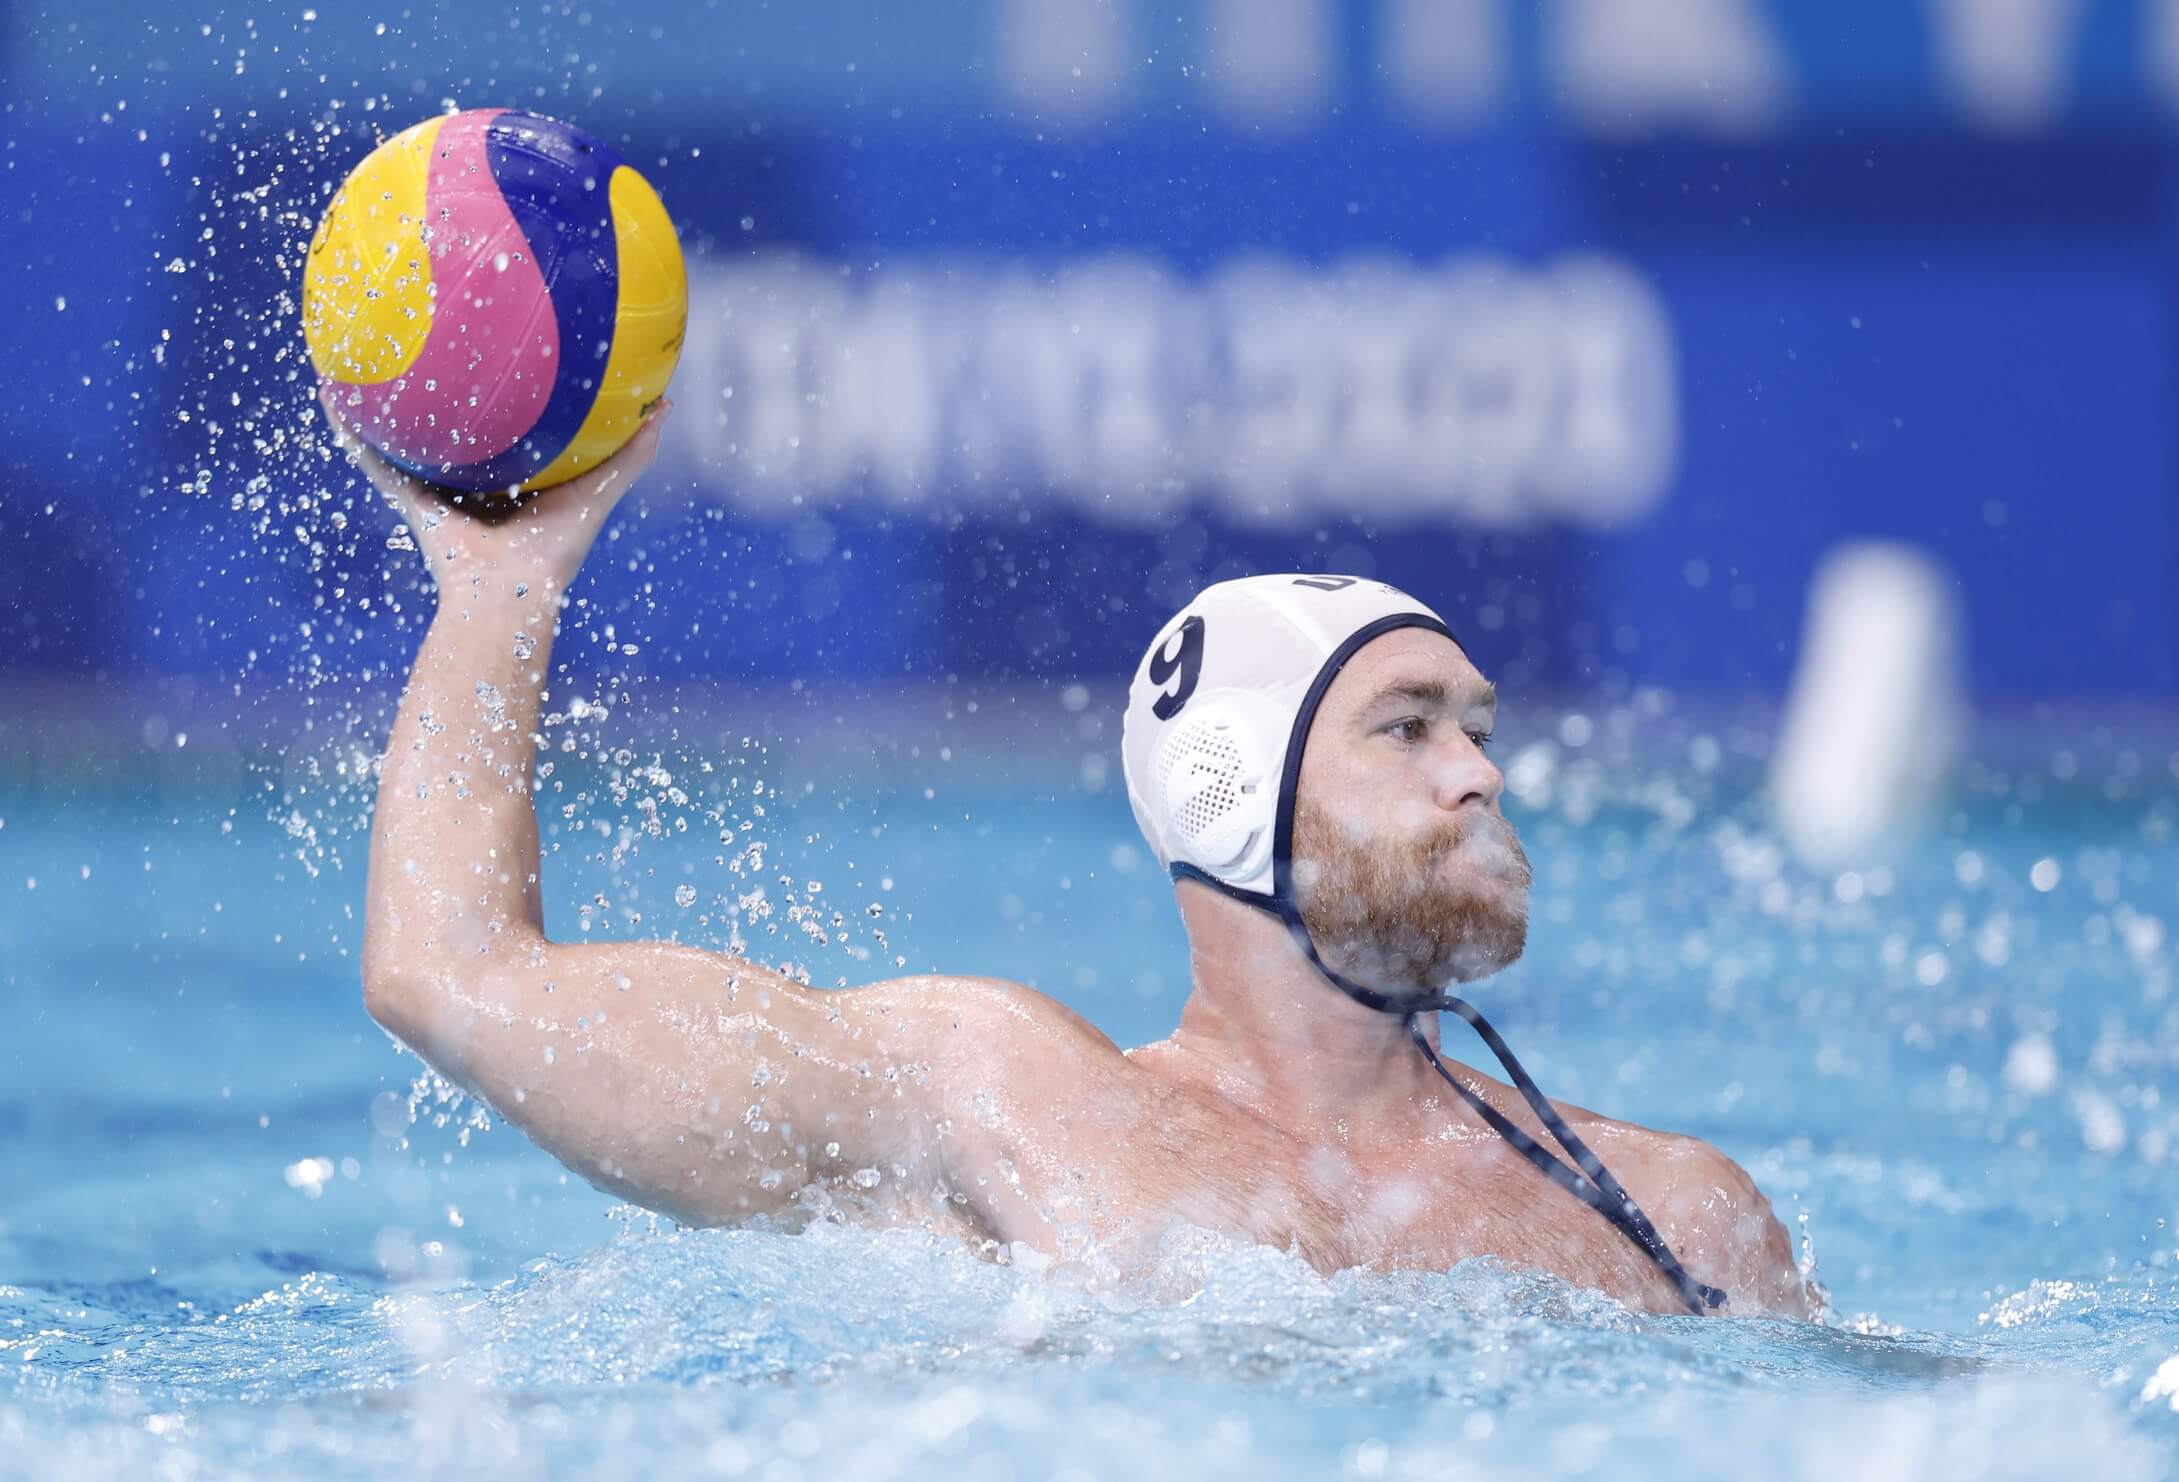 Jul 25, 2021; Tokyo, Japan; United States driver Alex Bowen (9) with the ball against Japan during Group A play during the Tokyo 2020 Olympic Summer Games at Tatsumi Water Polo Centre. Mandatory Credit: Yukihito Taguchi-USA TODAY Sports